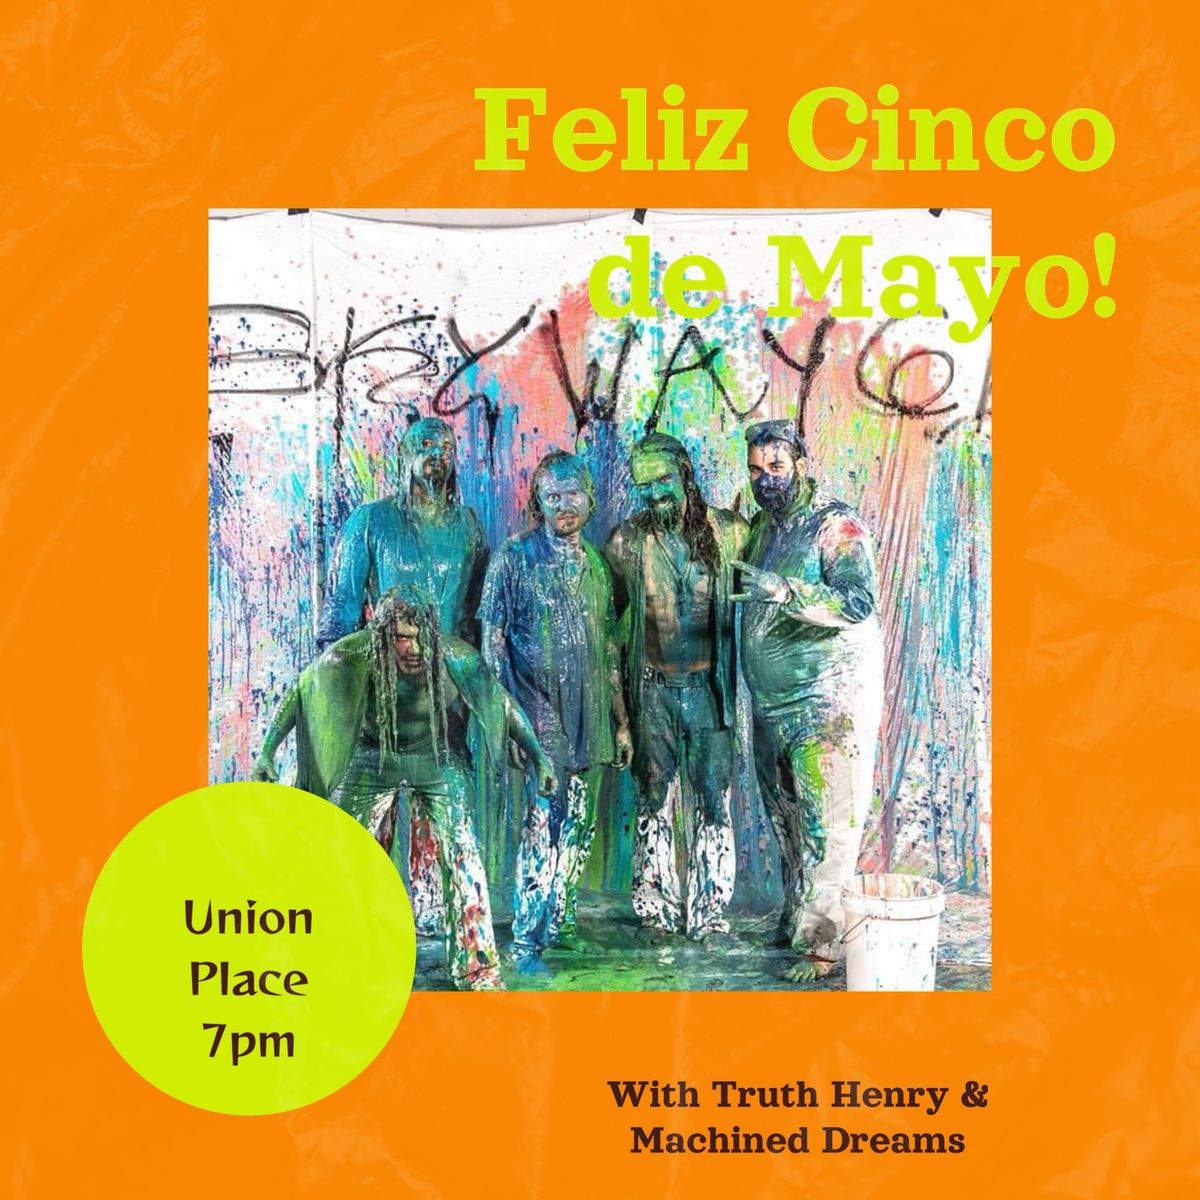 Cinco de Mayo Party featuring Skyway61, Machined Dreams, and Truth Henry at Union Place